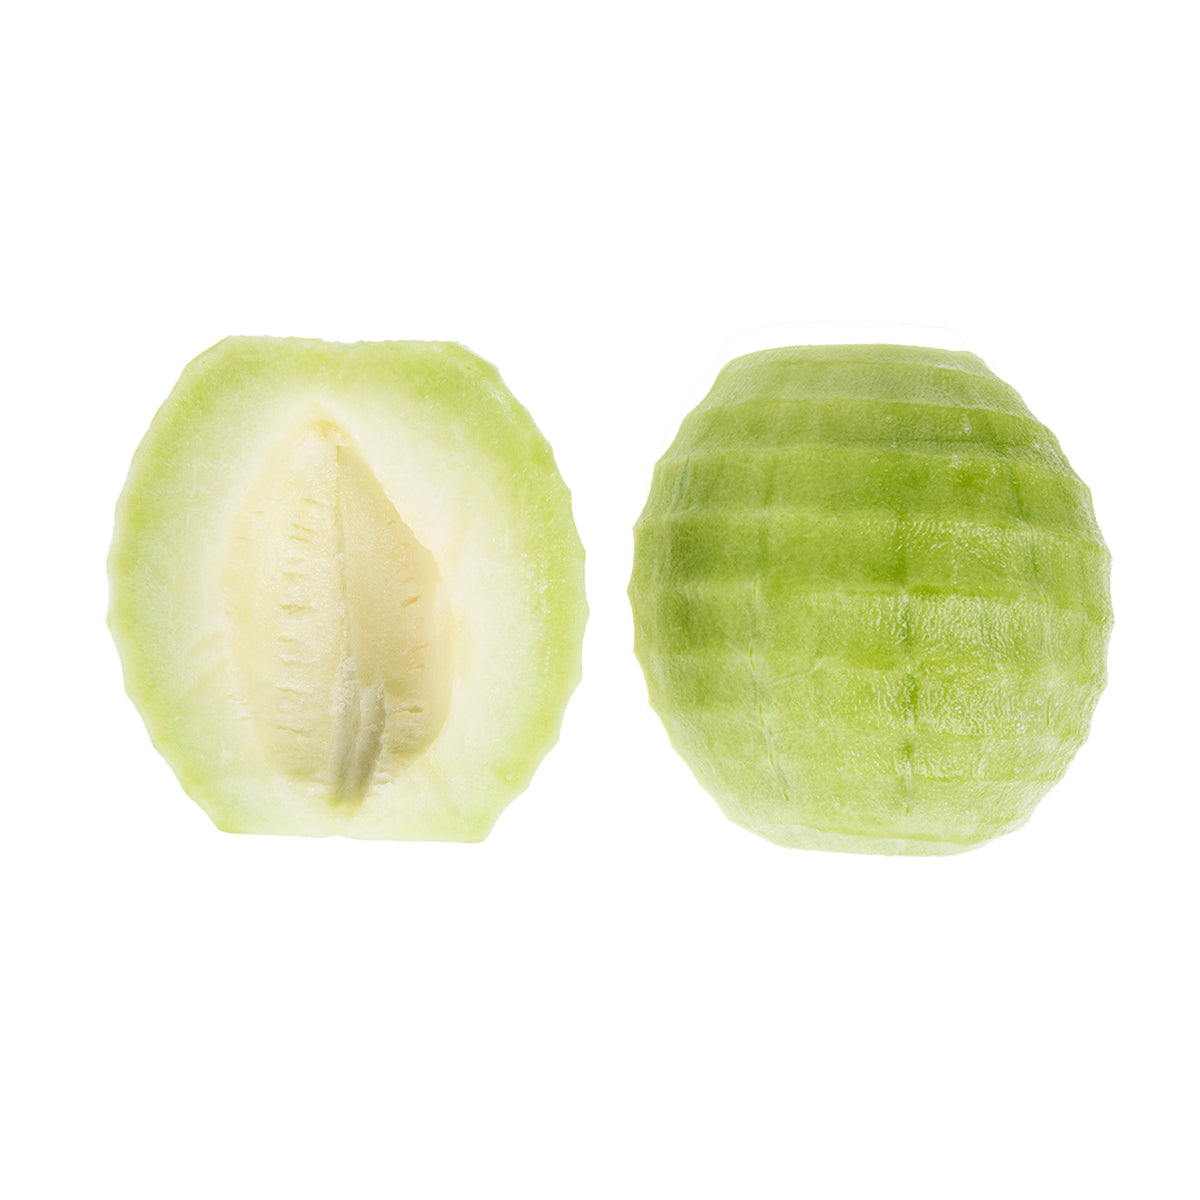 BoxNCase Halved and Peeled Honeydew Melons